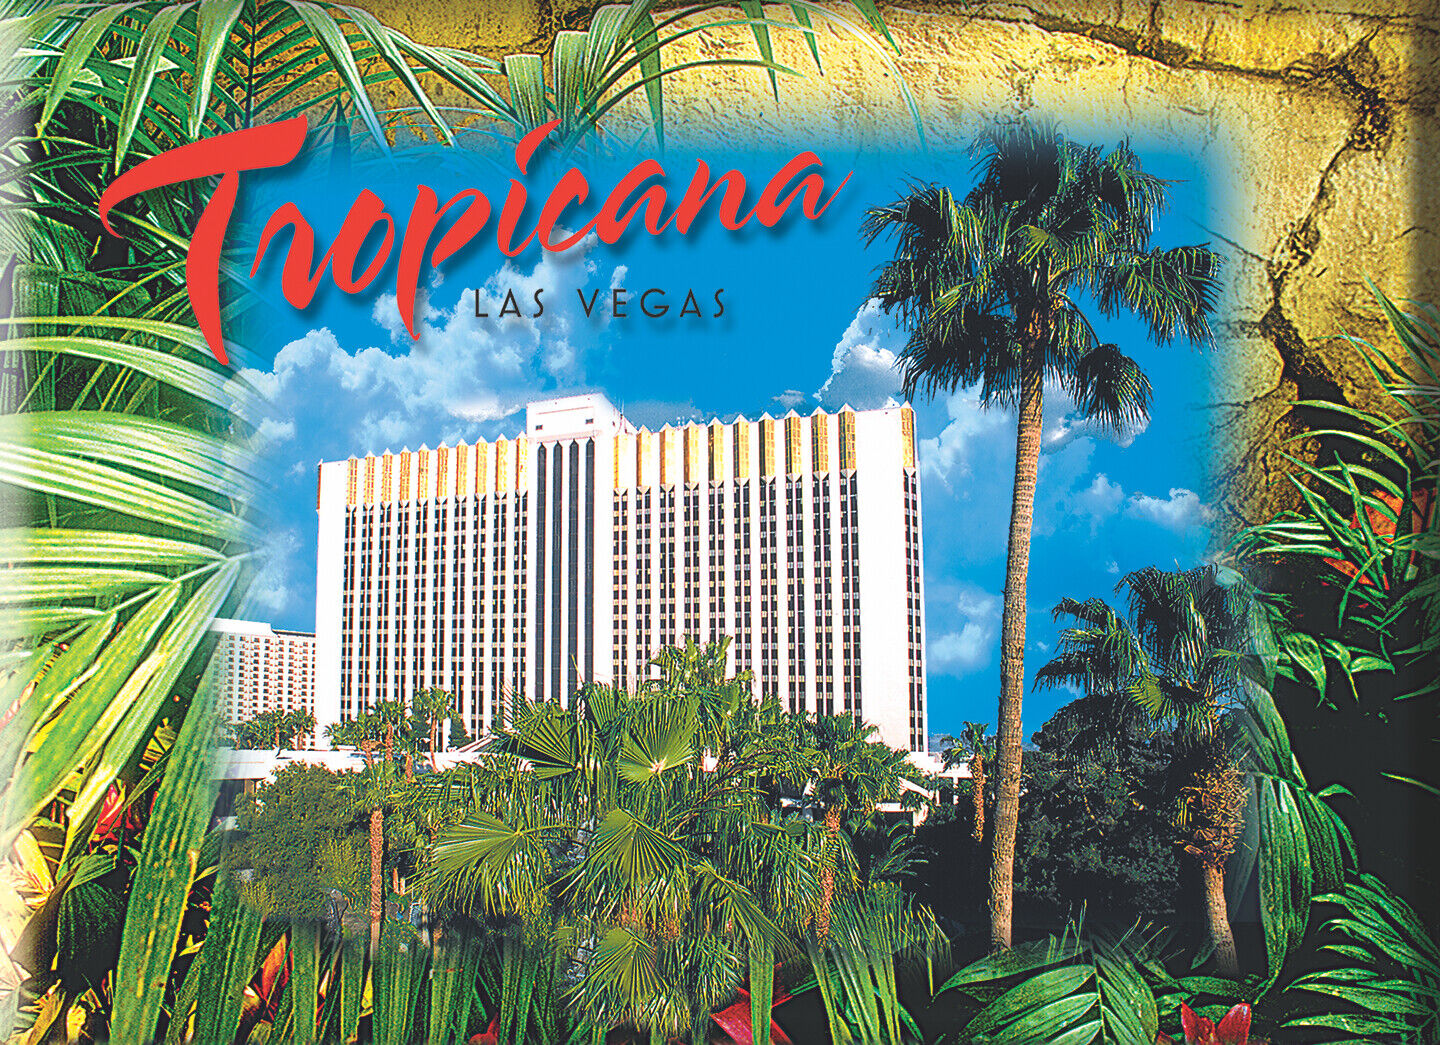 Large magnet (2.5x3.5) of  the Tropicana Hotel & Casino